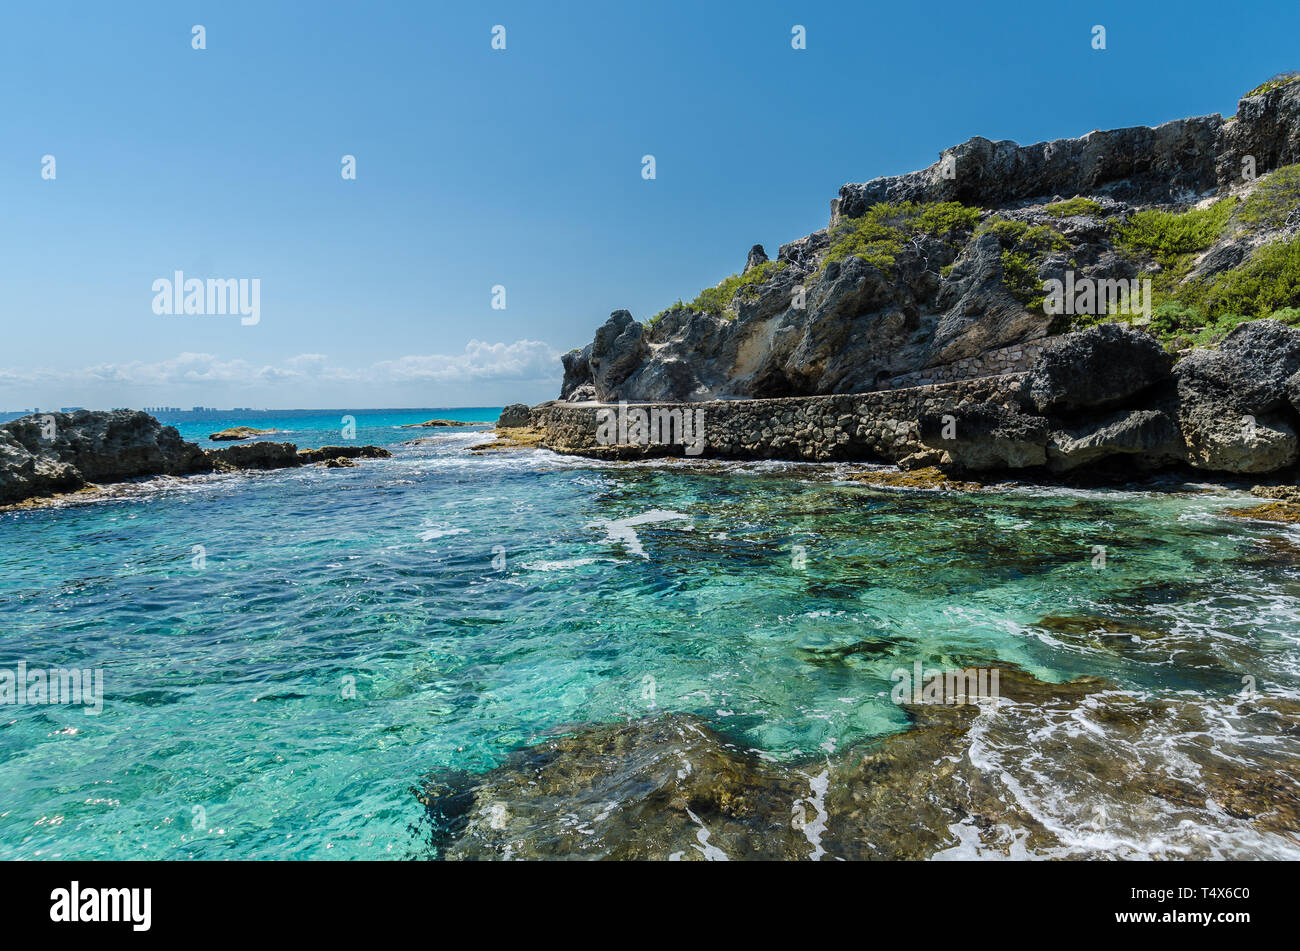 rocky cliffs at Isla Mujeres, Cancun Stock Photo